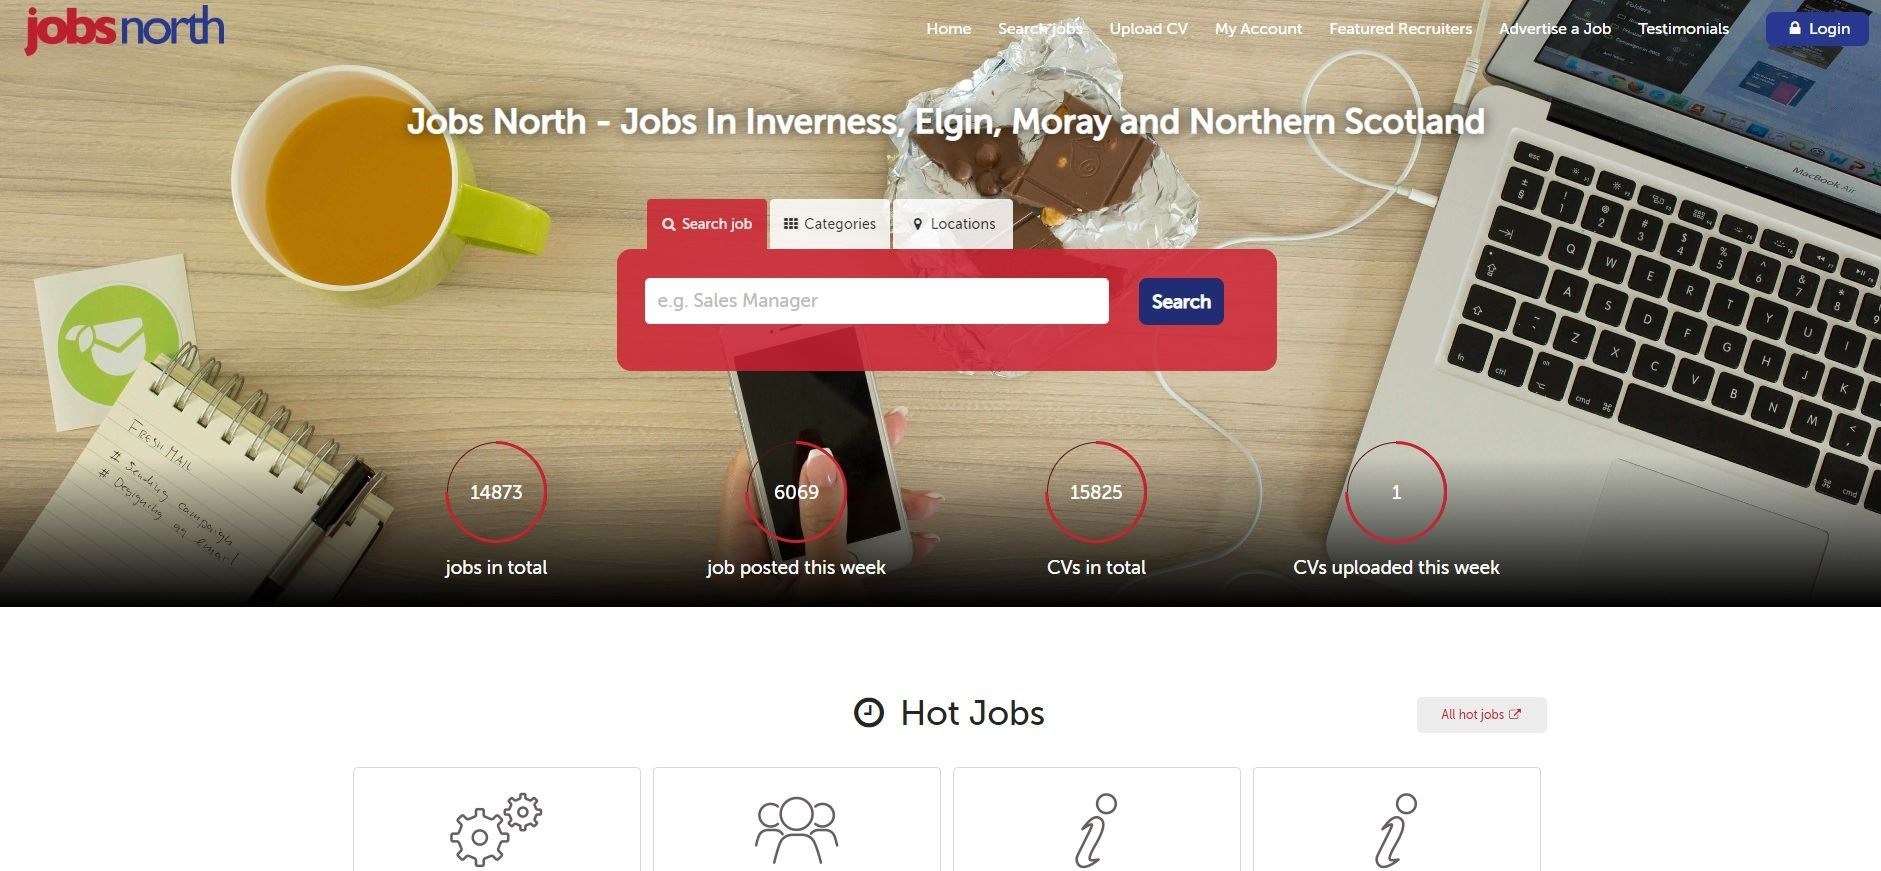 The Jobs North homepage.